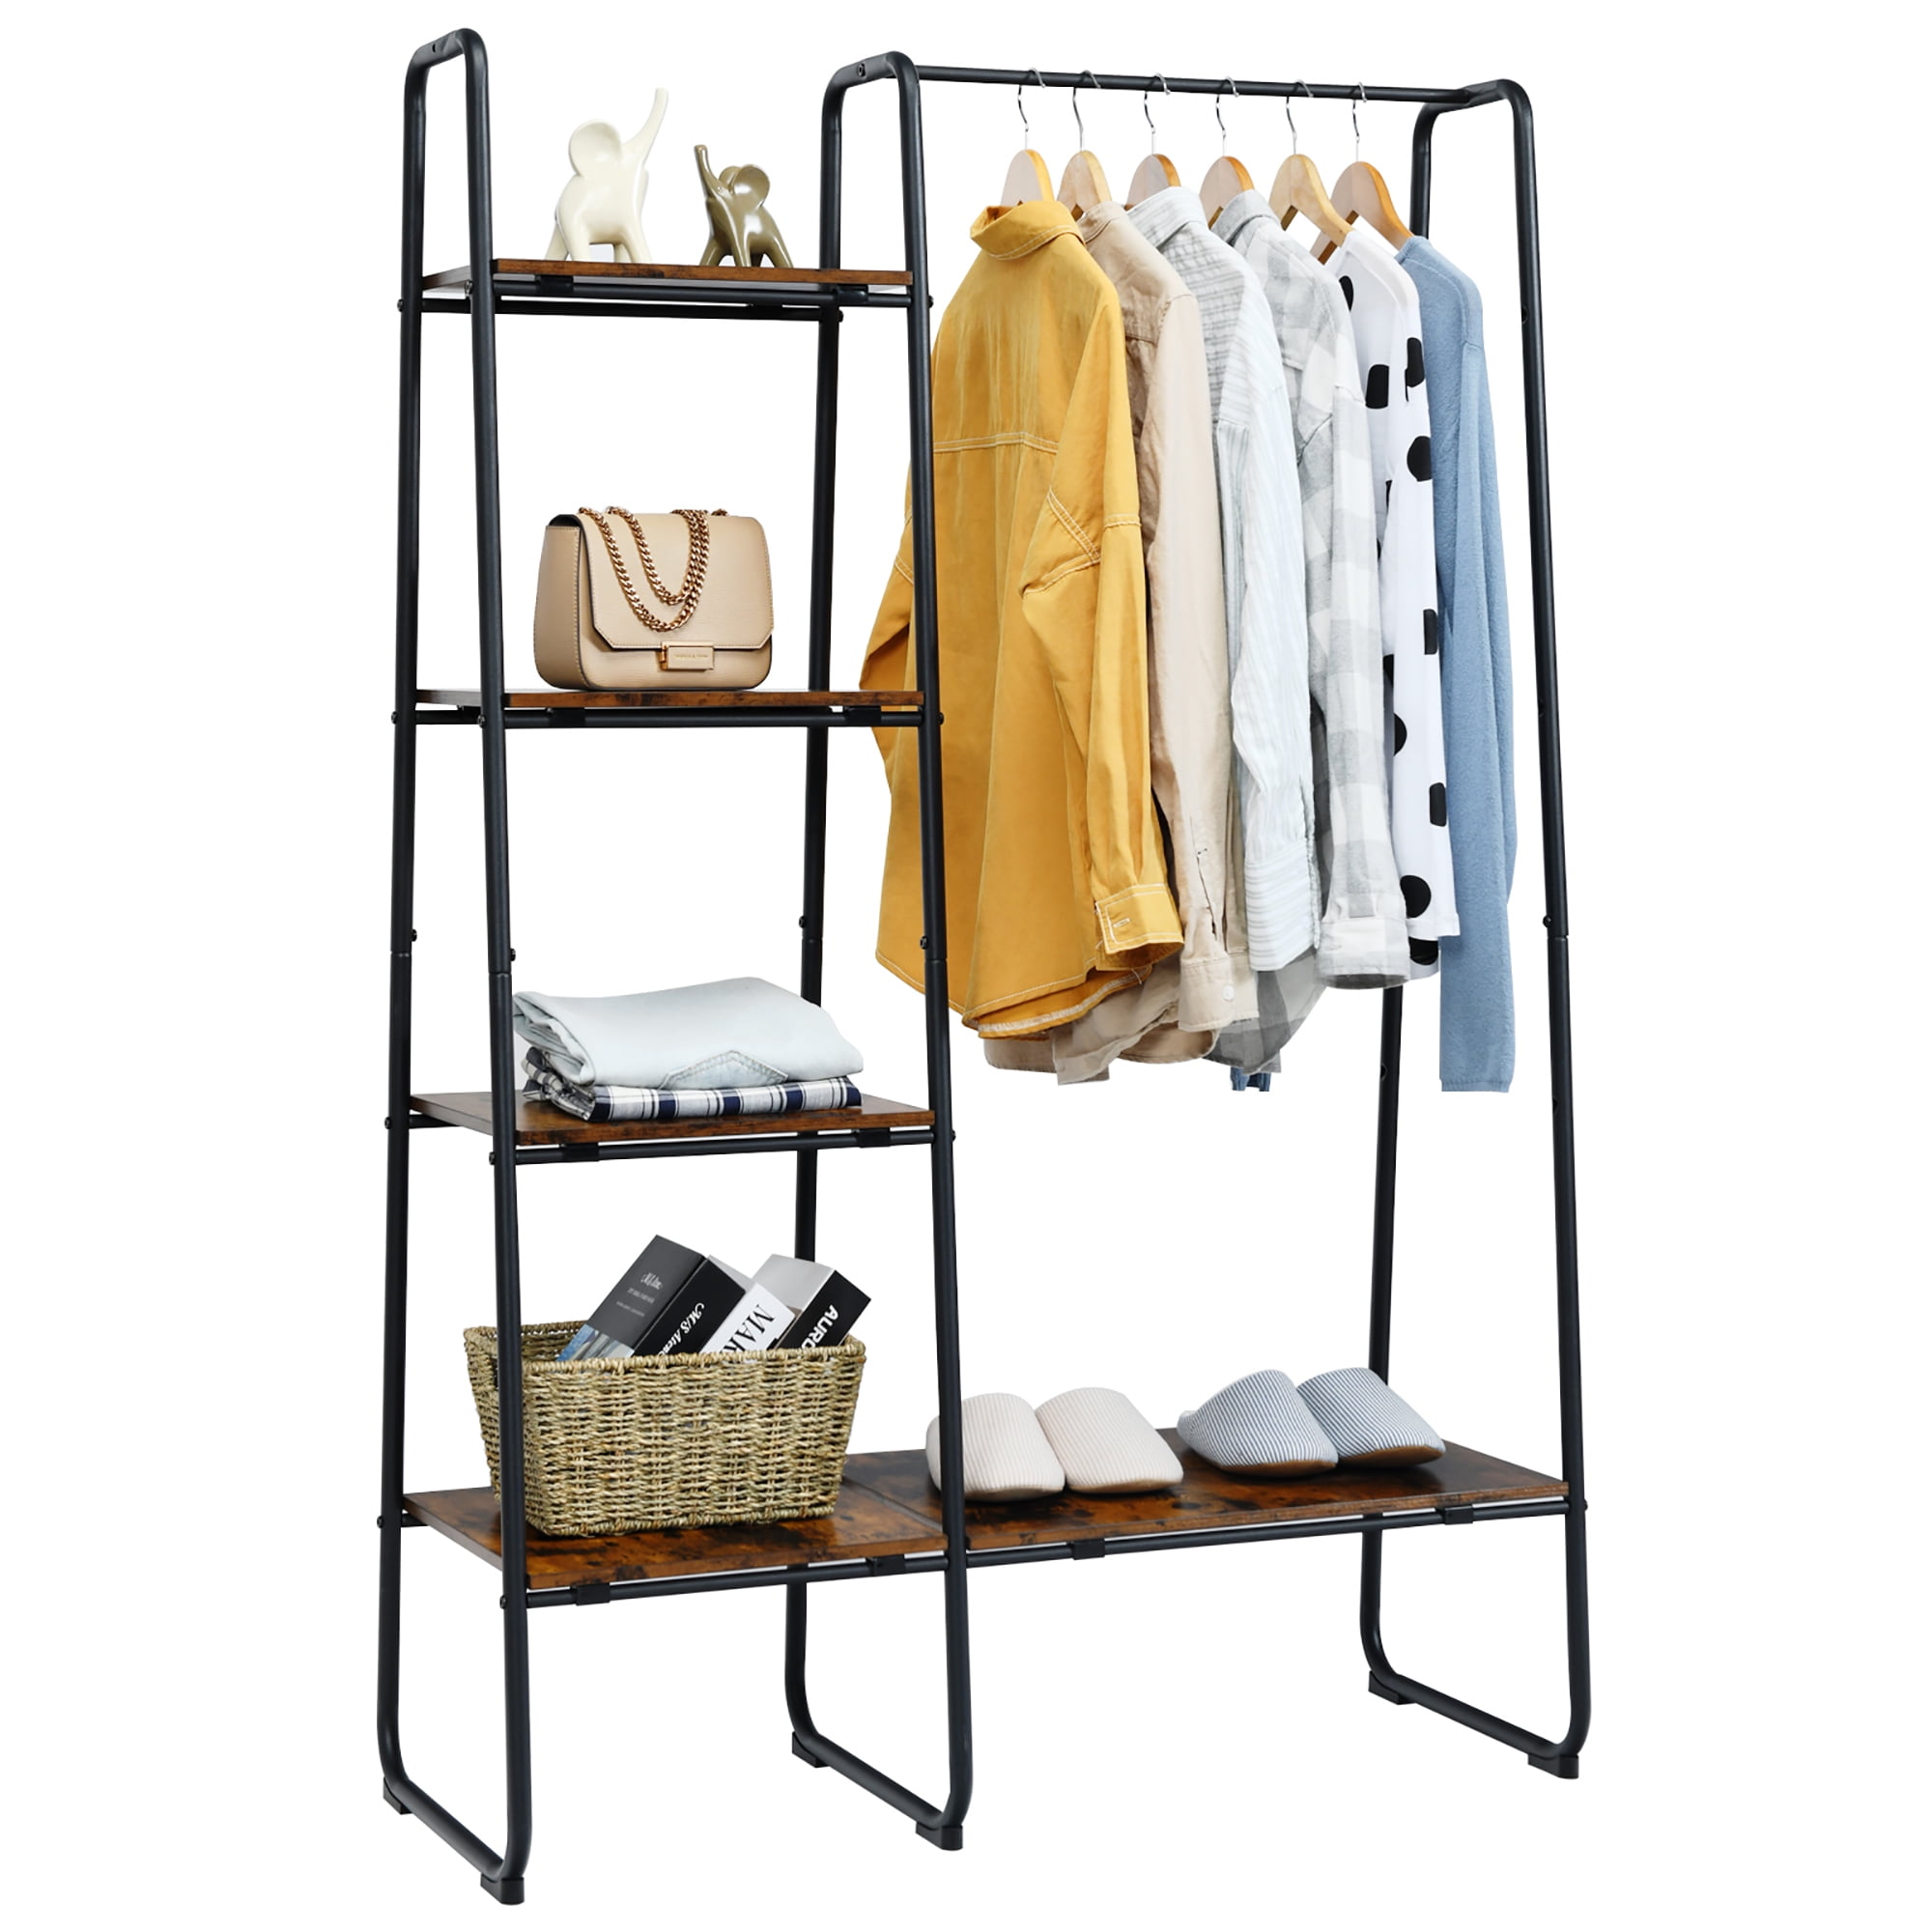 Urban Deco Shelf Dividers Wire Shelf Wood Closet Organizers And Storage 8 Packs White Coated Steel Shelve Dividers for Clothes Purse Towel Wardrobe Kitchen Pantry Organization 